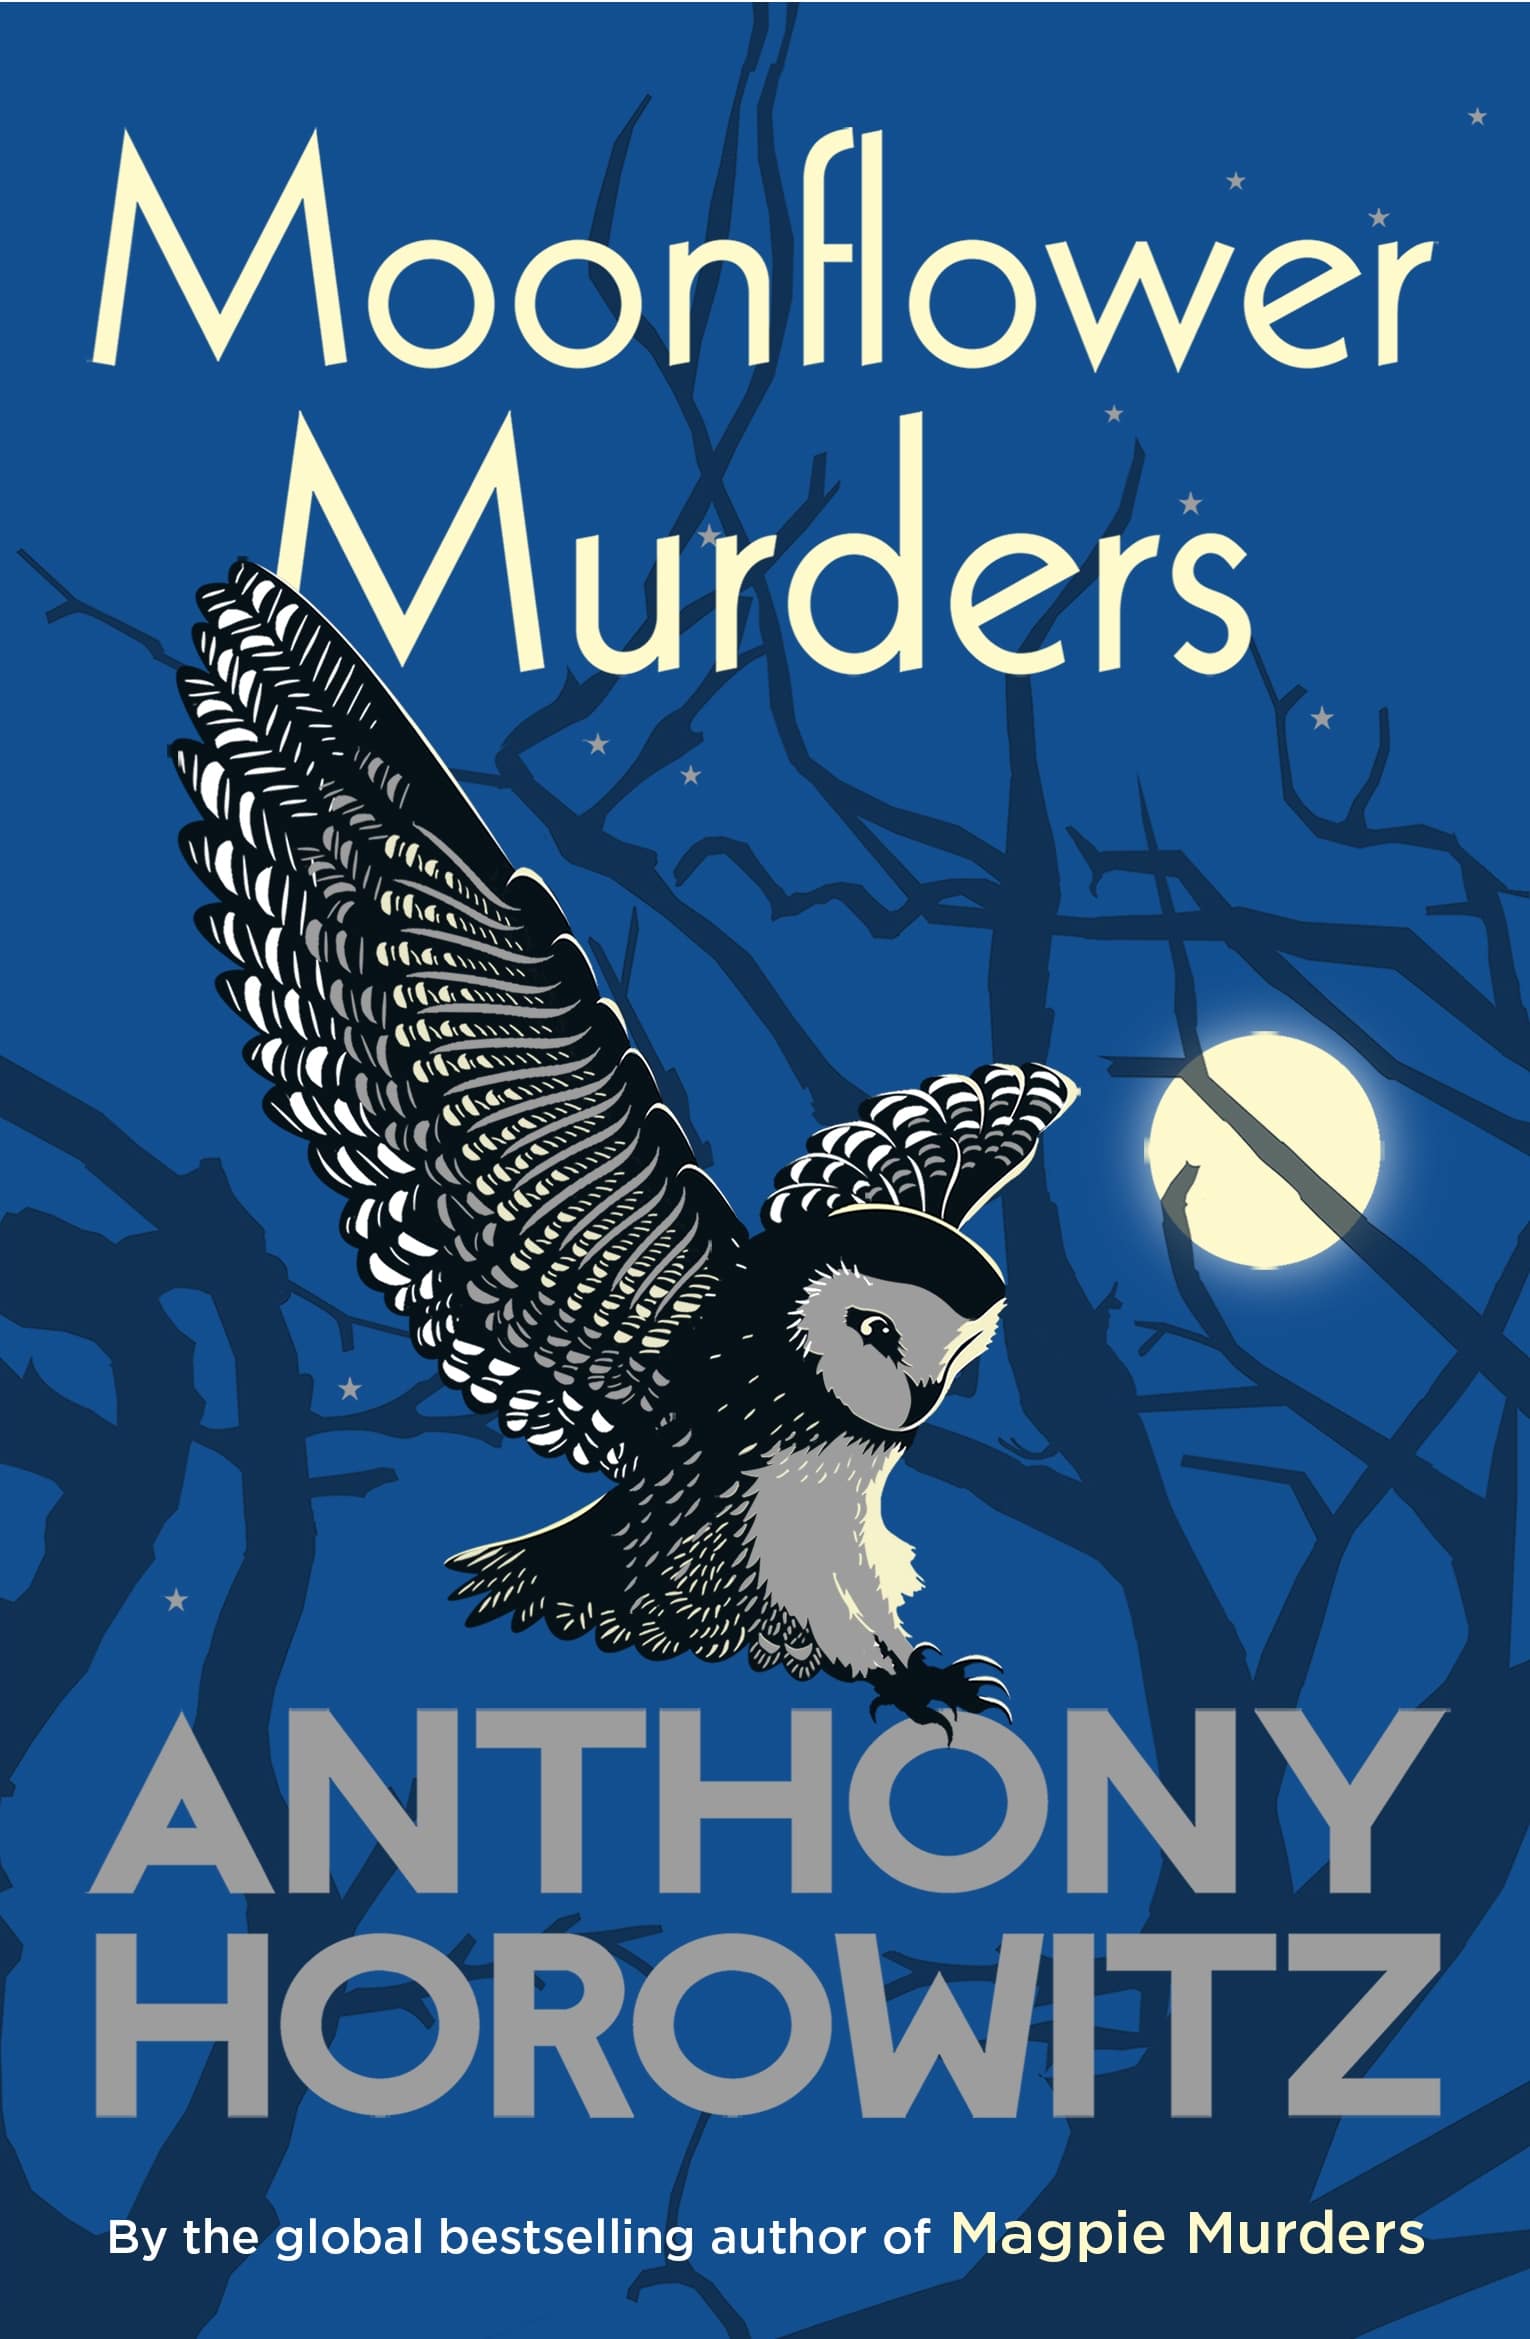 Book jacket of Moonflower Murders by Anthony Horowitz, one of the best books out this month